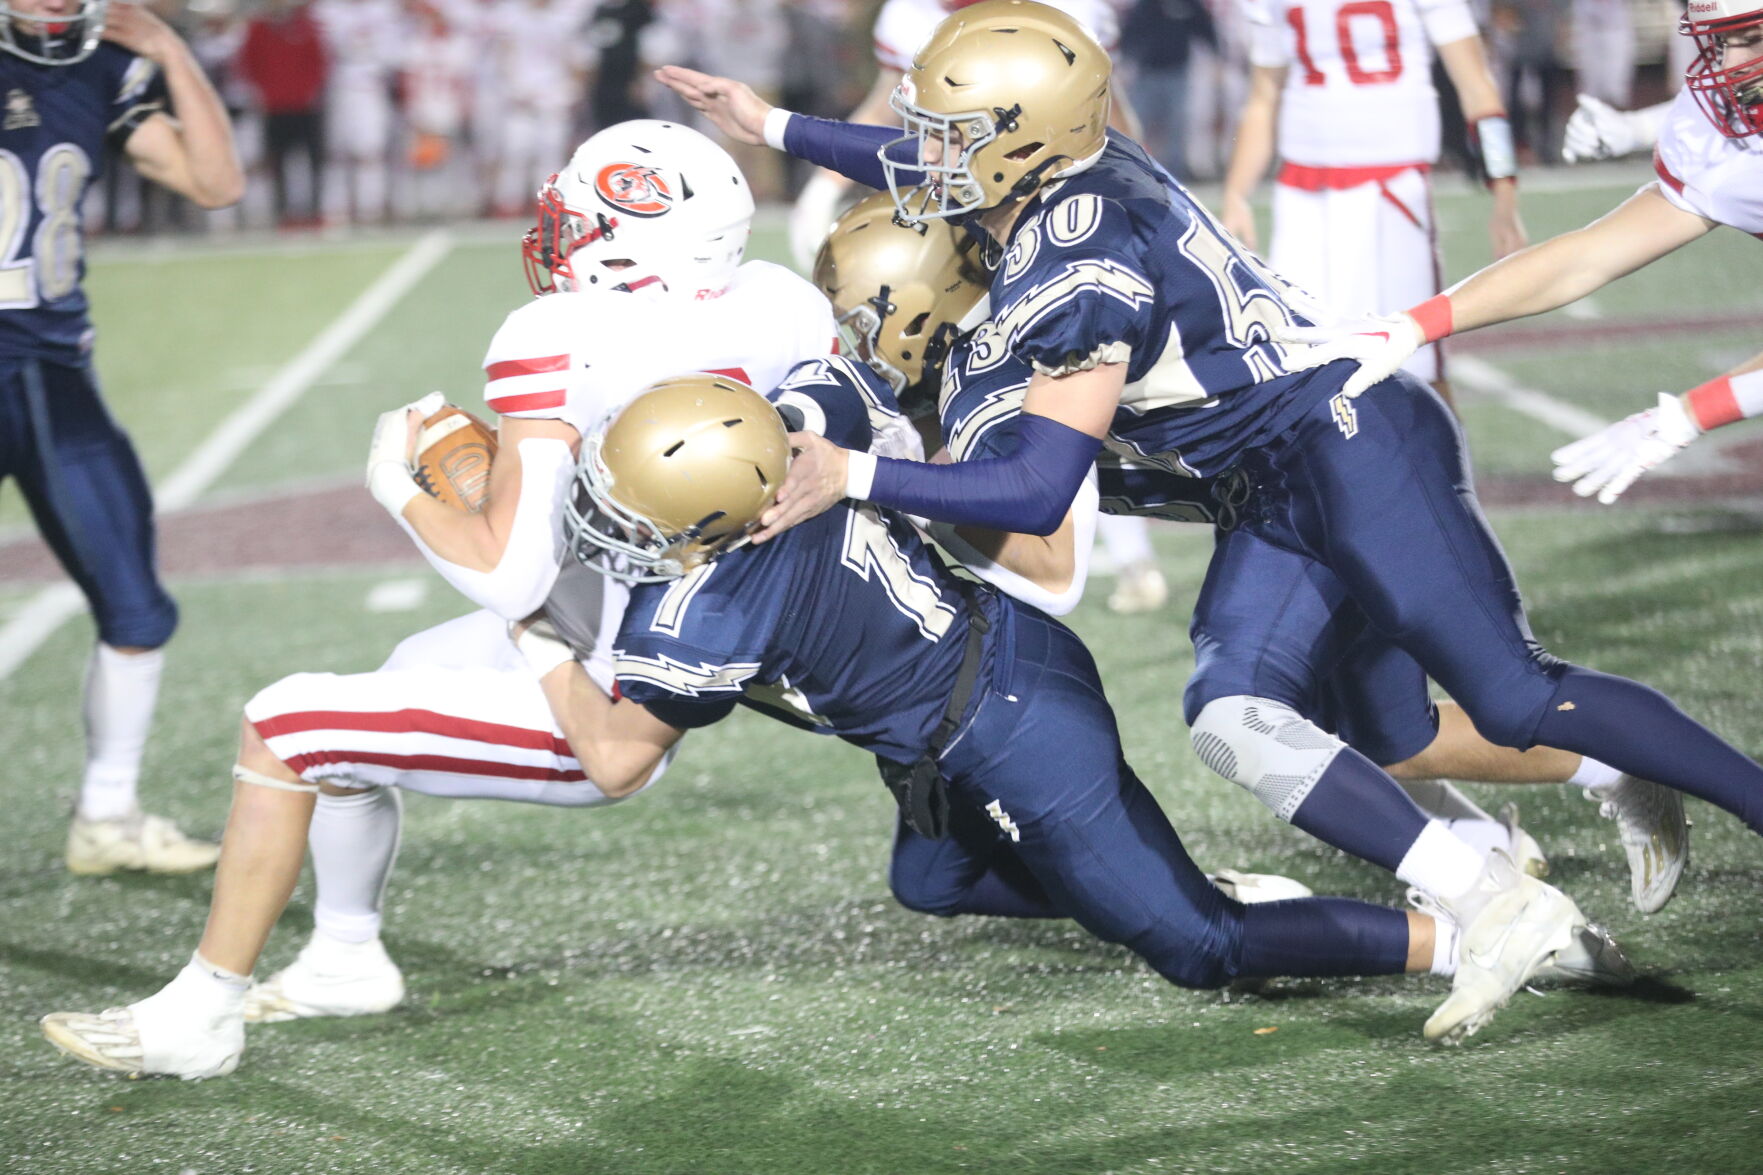 Aquinas Blugolds Defeat Columbus Cardinals in Brutal High School Football Game | Colton Brunell Sets State Rushing Record, Shane Willenbring’s Defensive Prowess Dominates